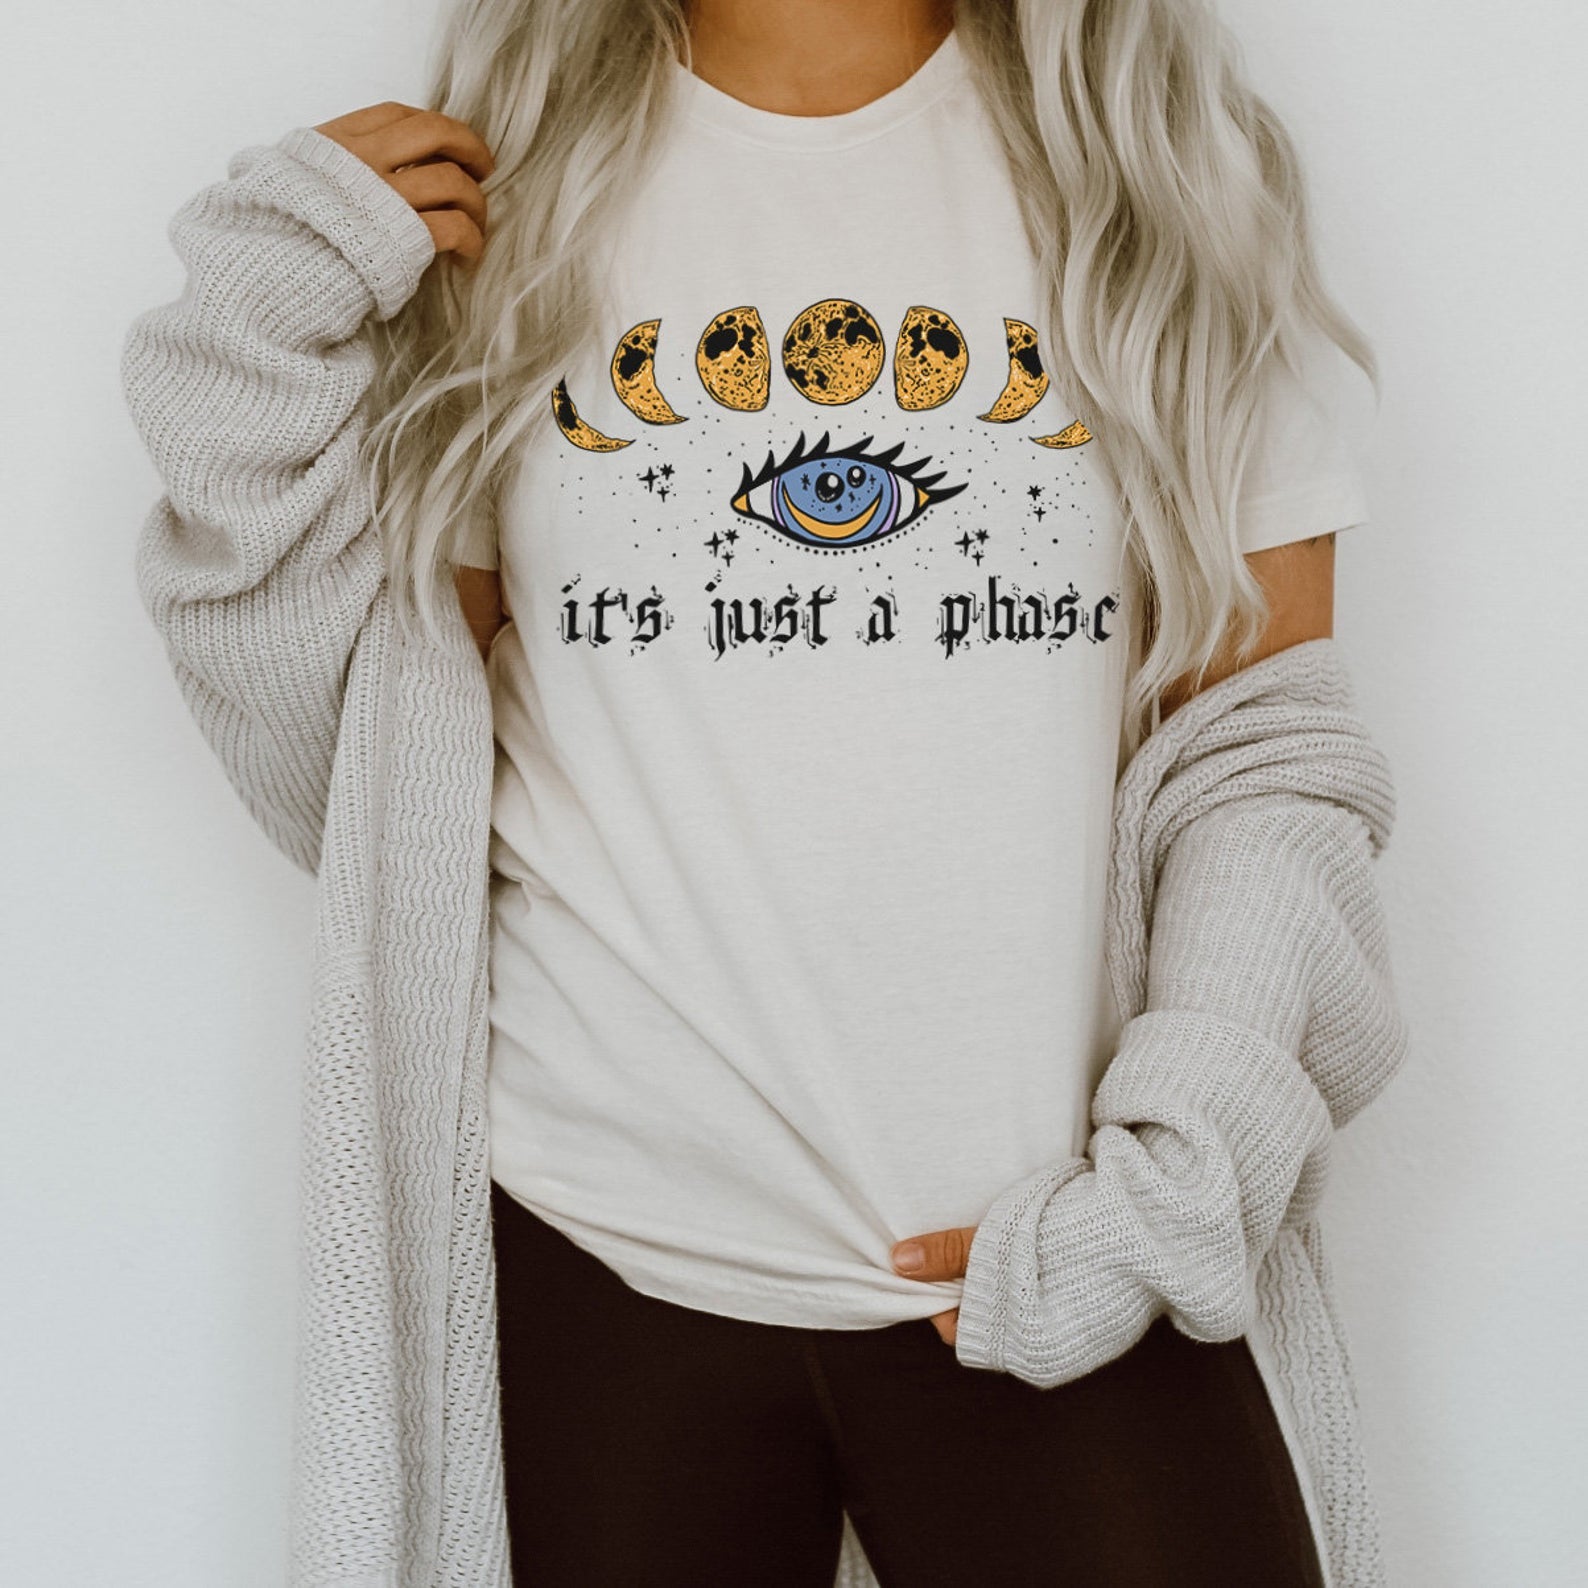 « IT'S JUST A PHASE » UNISEX TEE